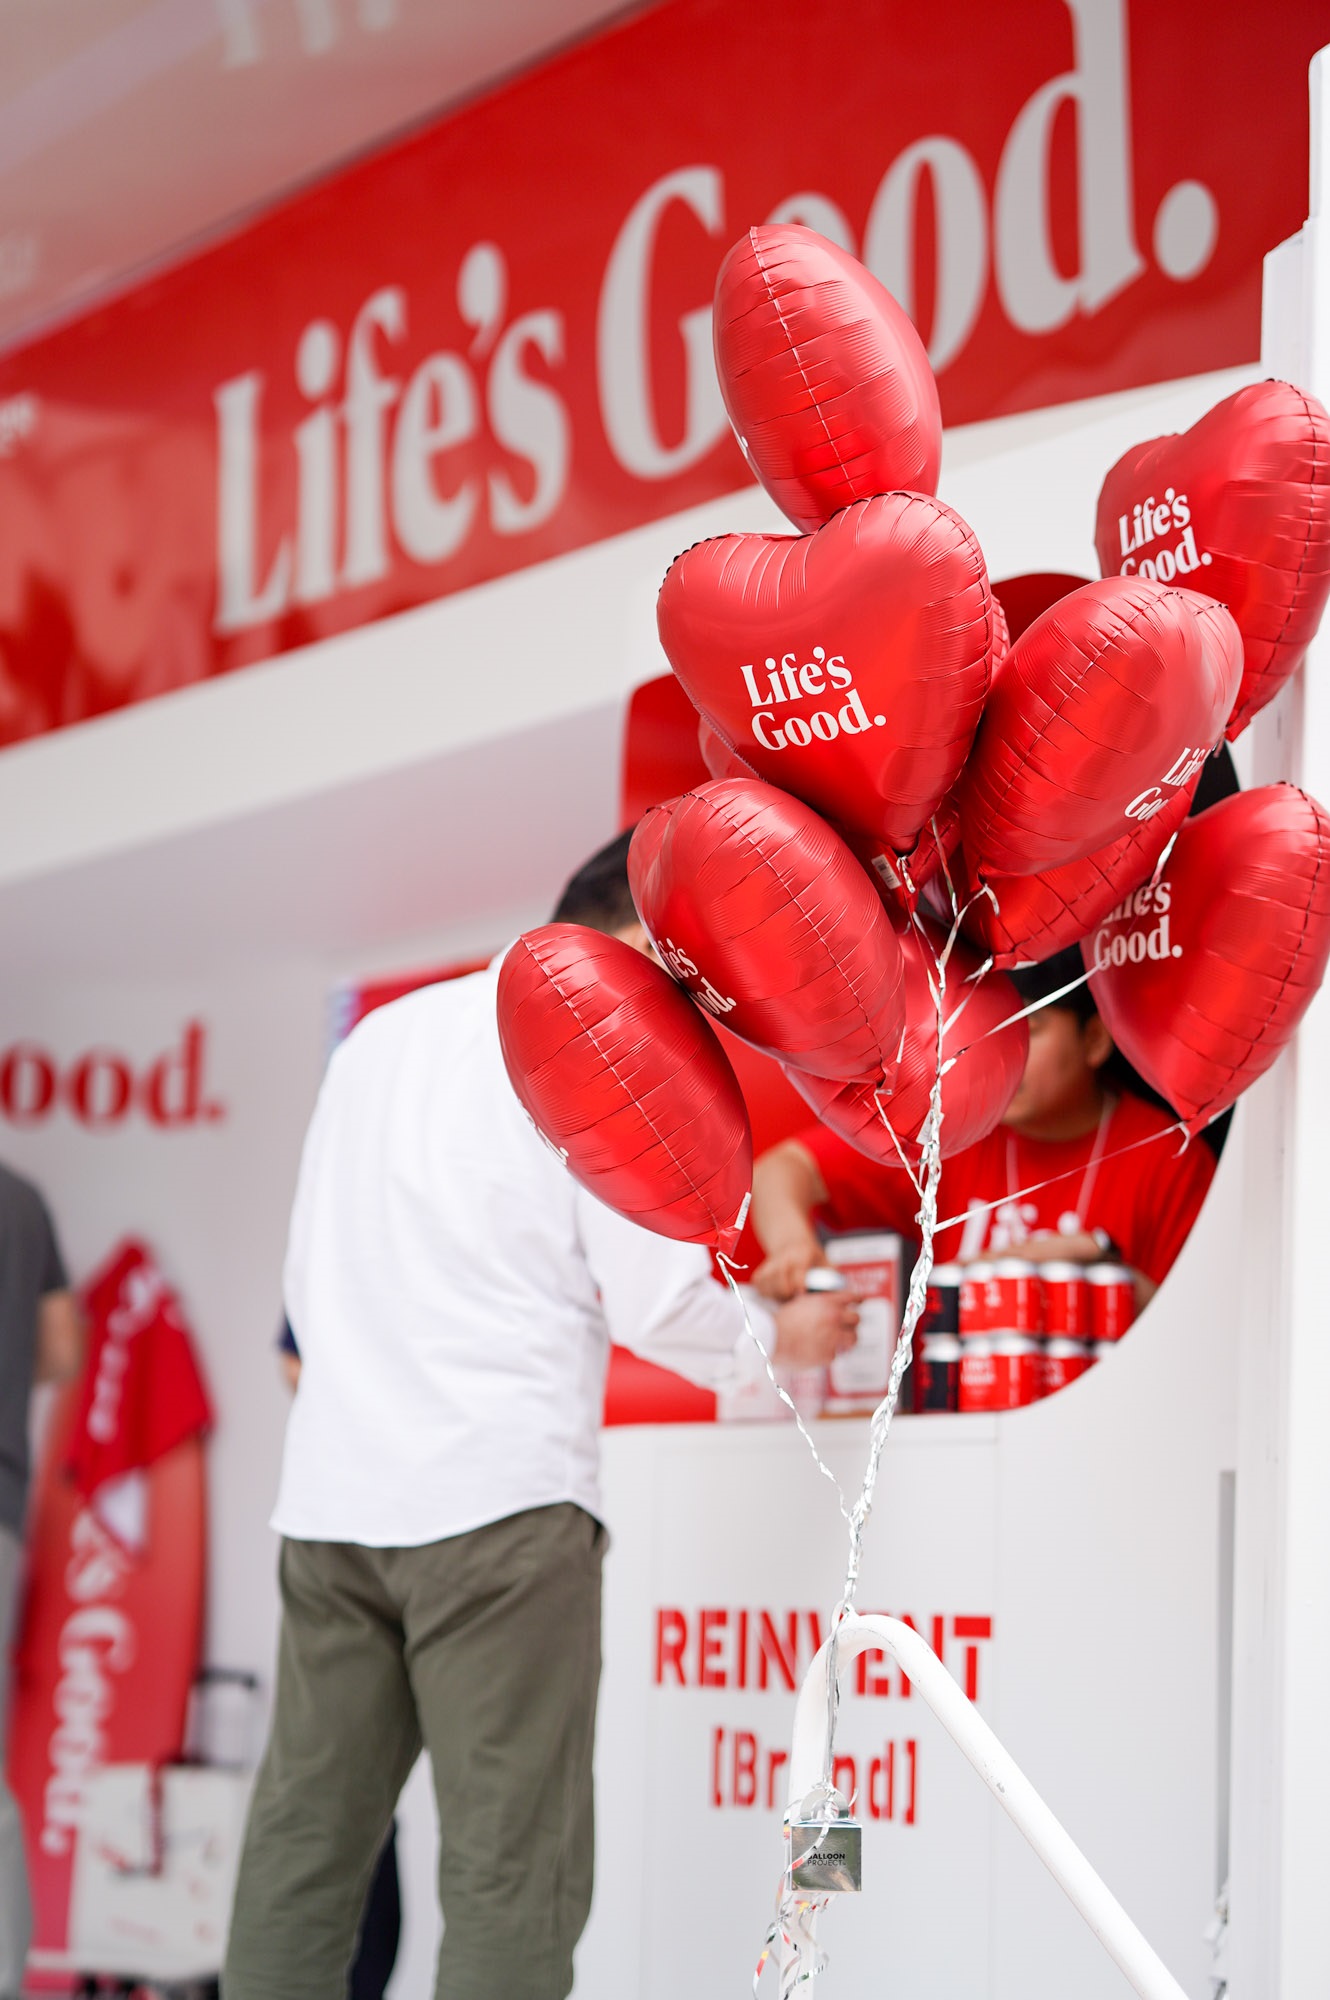 A close-up photo of a bunch of red balloons with the phrase "Life's Good"